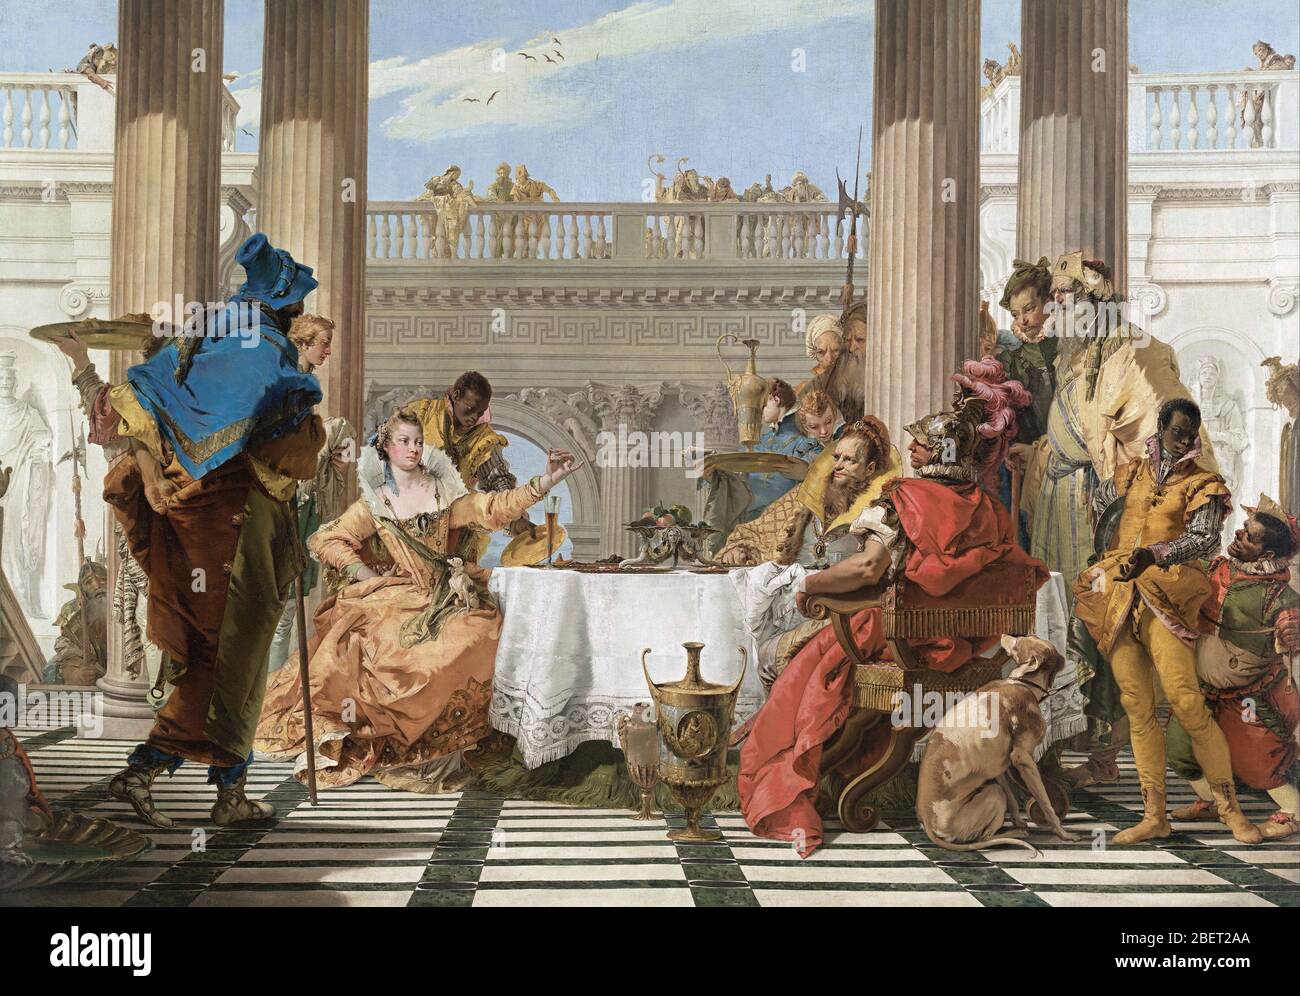 The Banquet of Cleopatro oil painting depicts Egyptian Queen Cleopatra having a lavish feast. Stock Photo